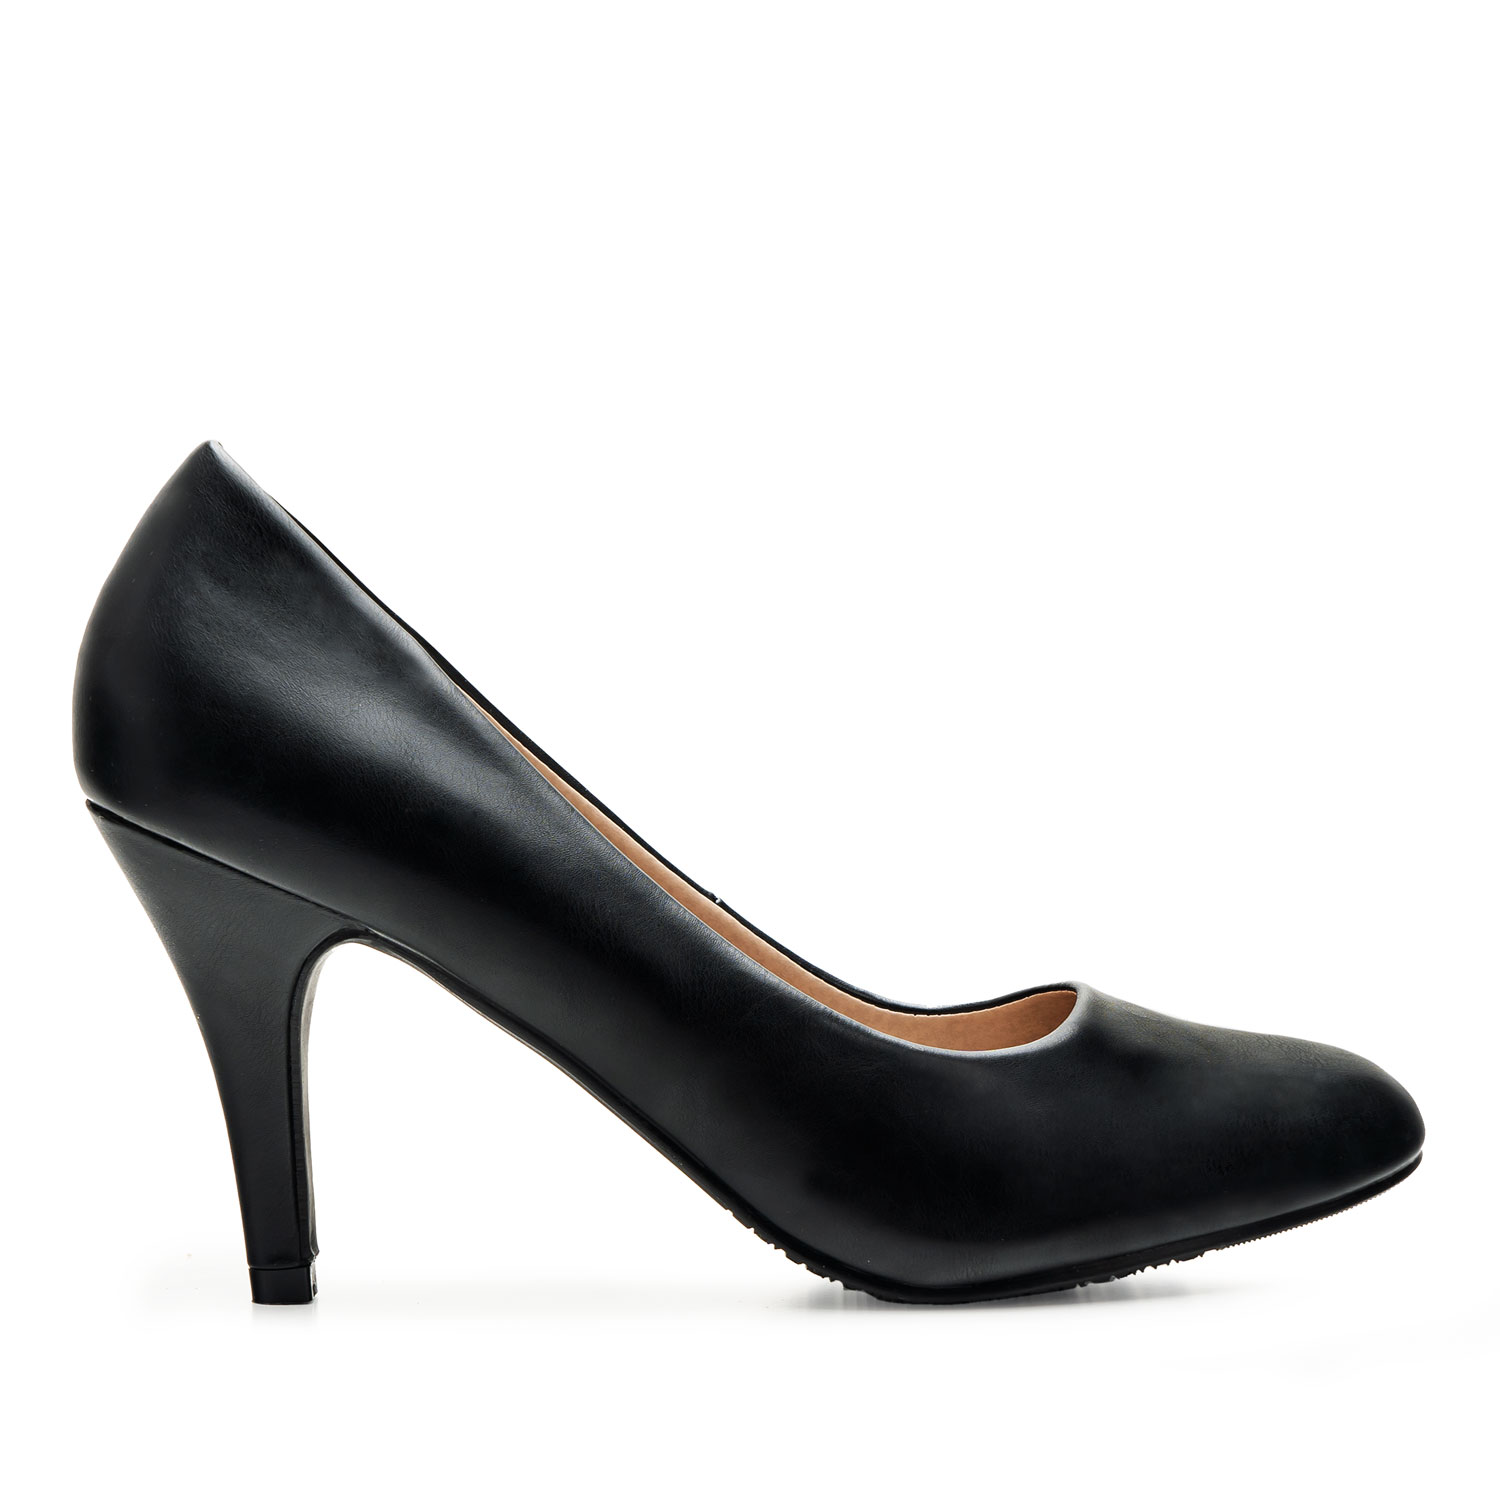 Retro High Heel Pumps in Black faux Leather 